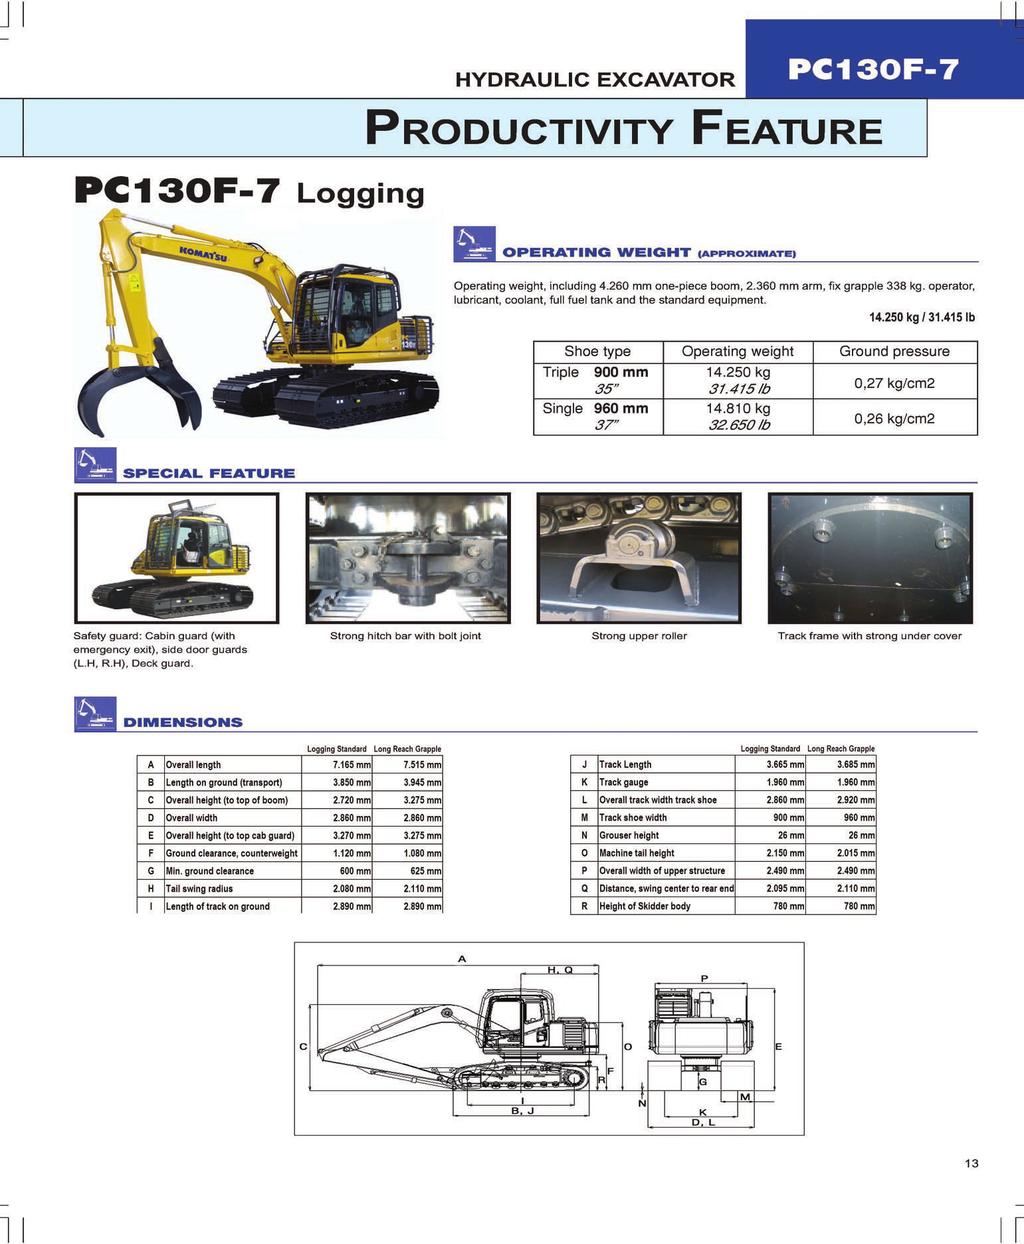 and Length onreliability ground (transport) B Excellent A Logging Standard Overall length Overall height (to top of boom) C durability Reinforced width D Overall E F G H I work equipment Overall